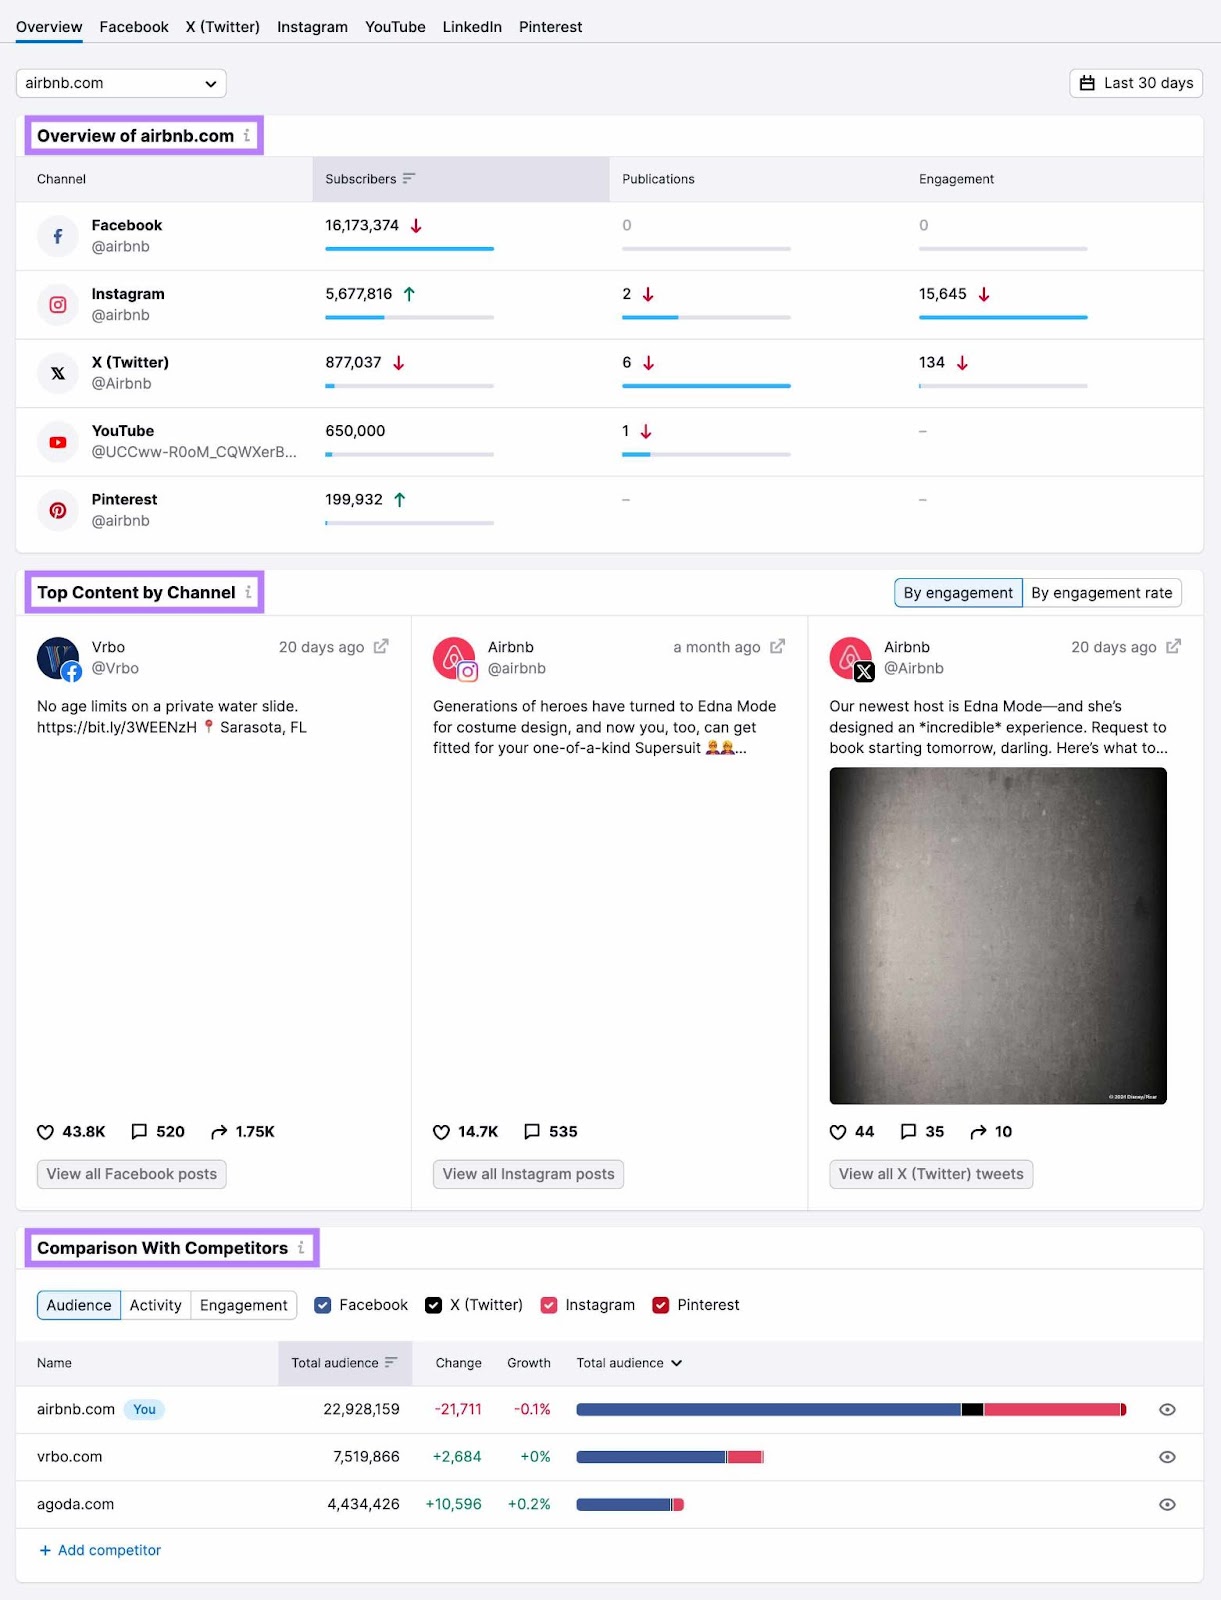 Social Tracker report showing an overview of engagement levels, top content by channel and a comparison with competitors.